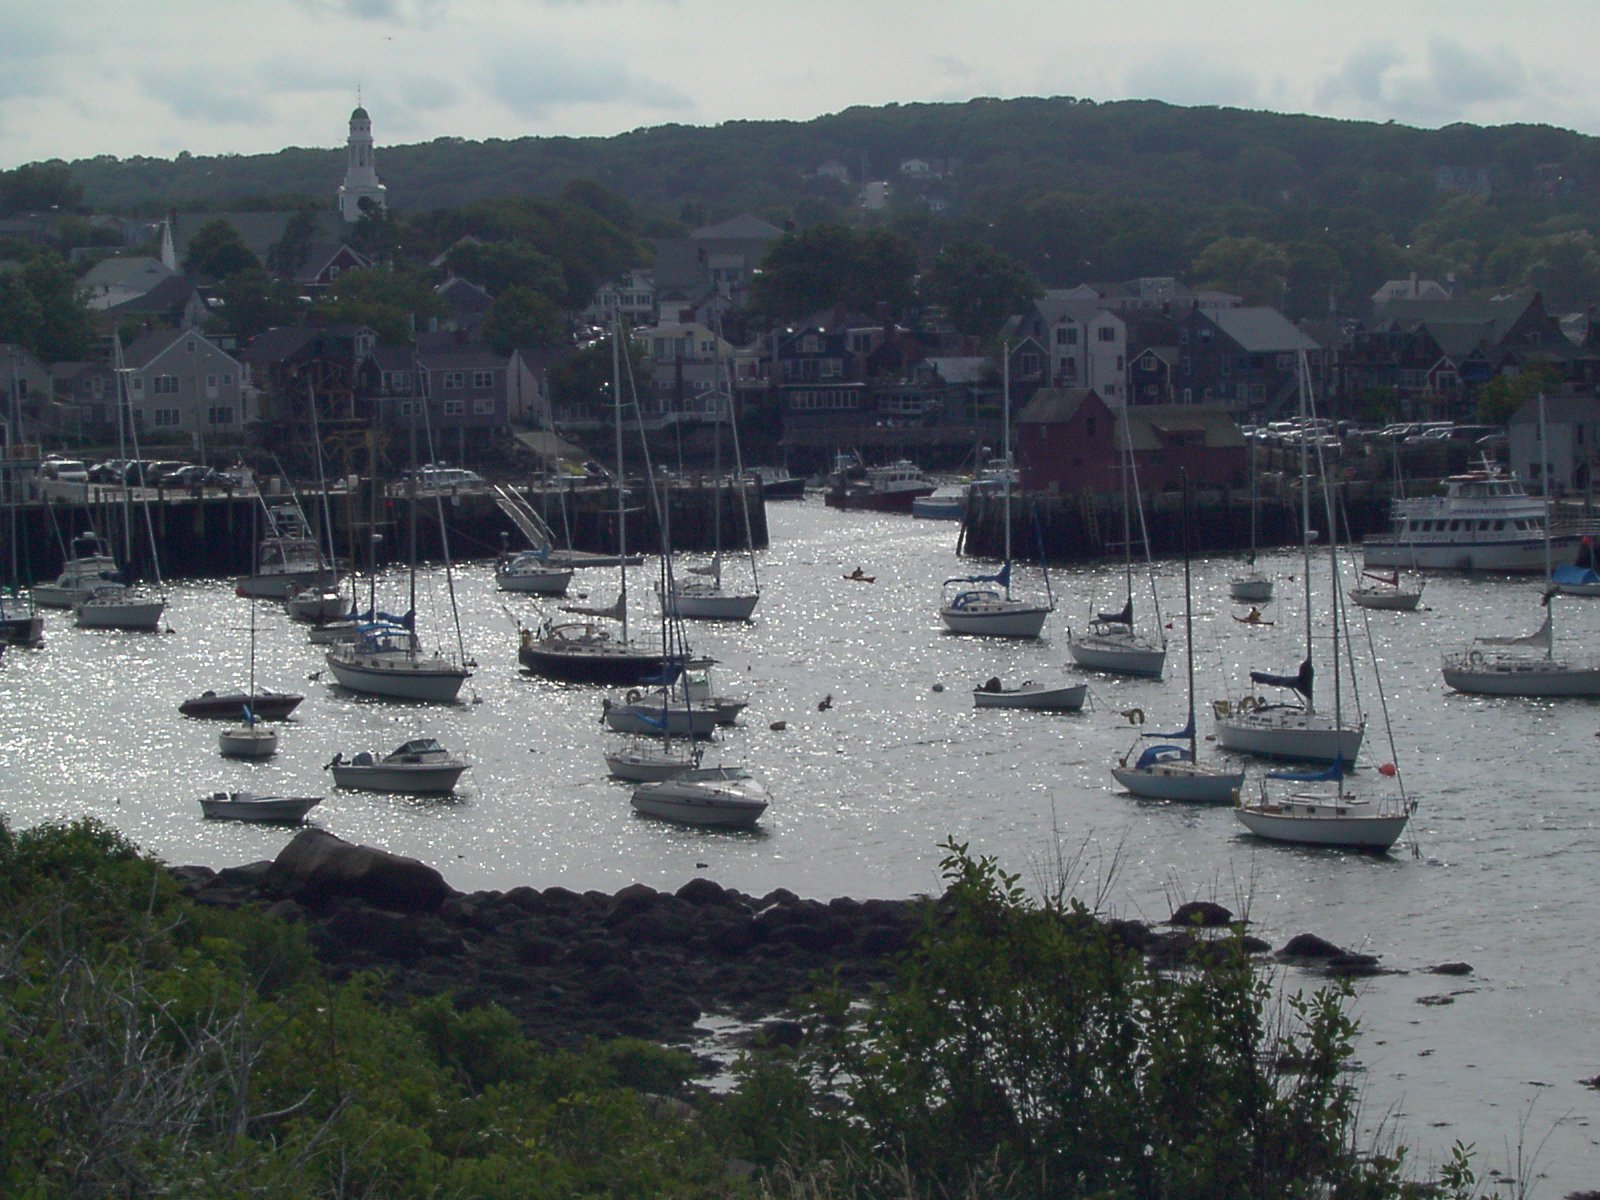 a harbor with many sail boats and trees